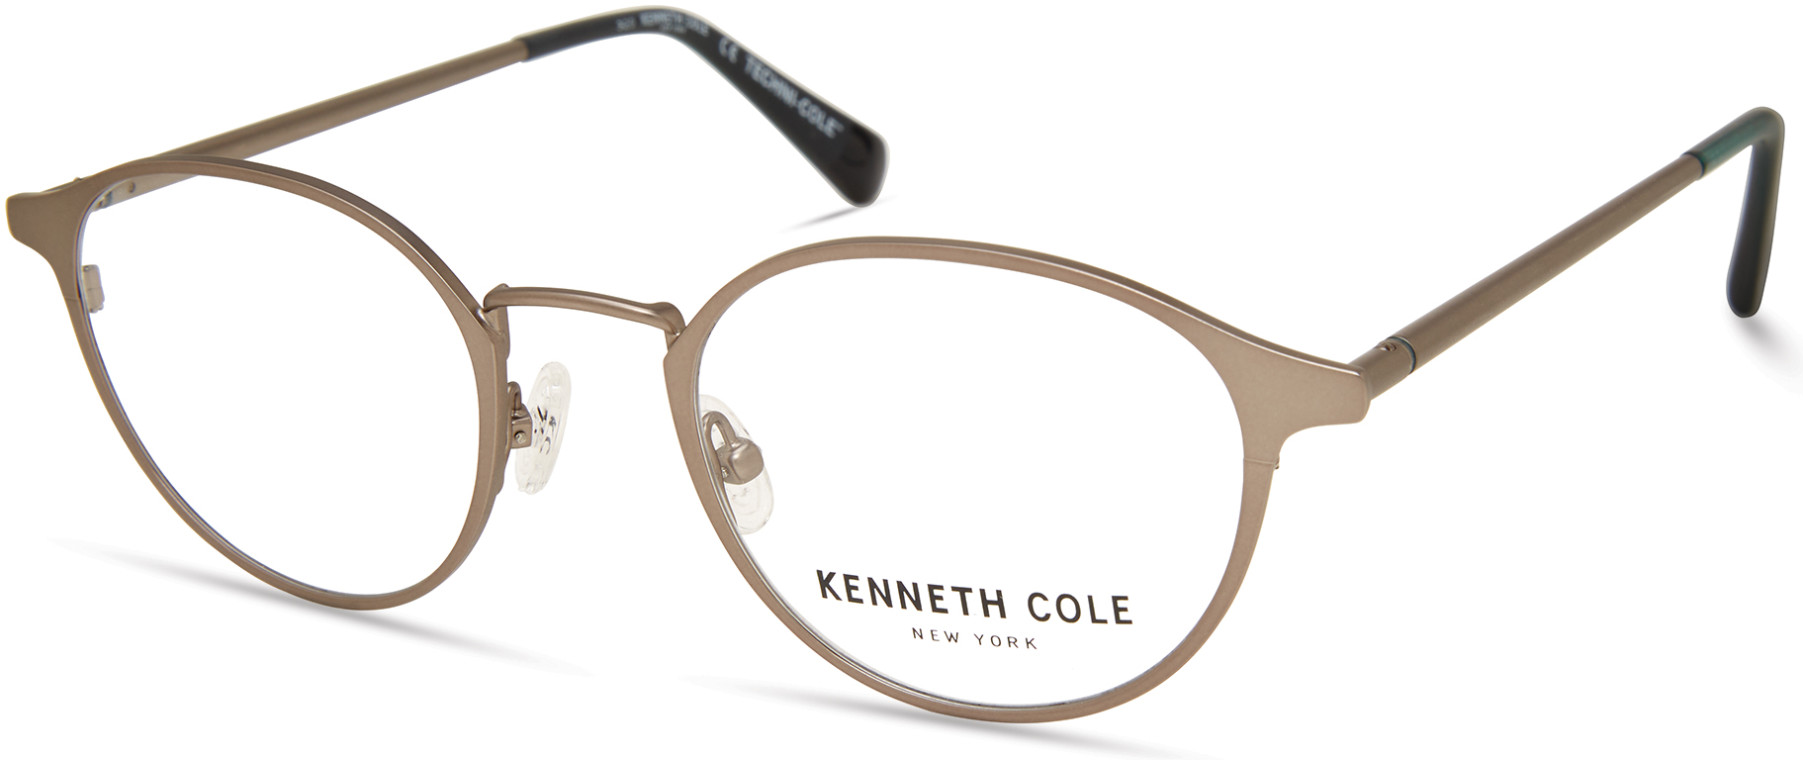 KENNETH COLE NY 0324 009